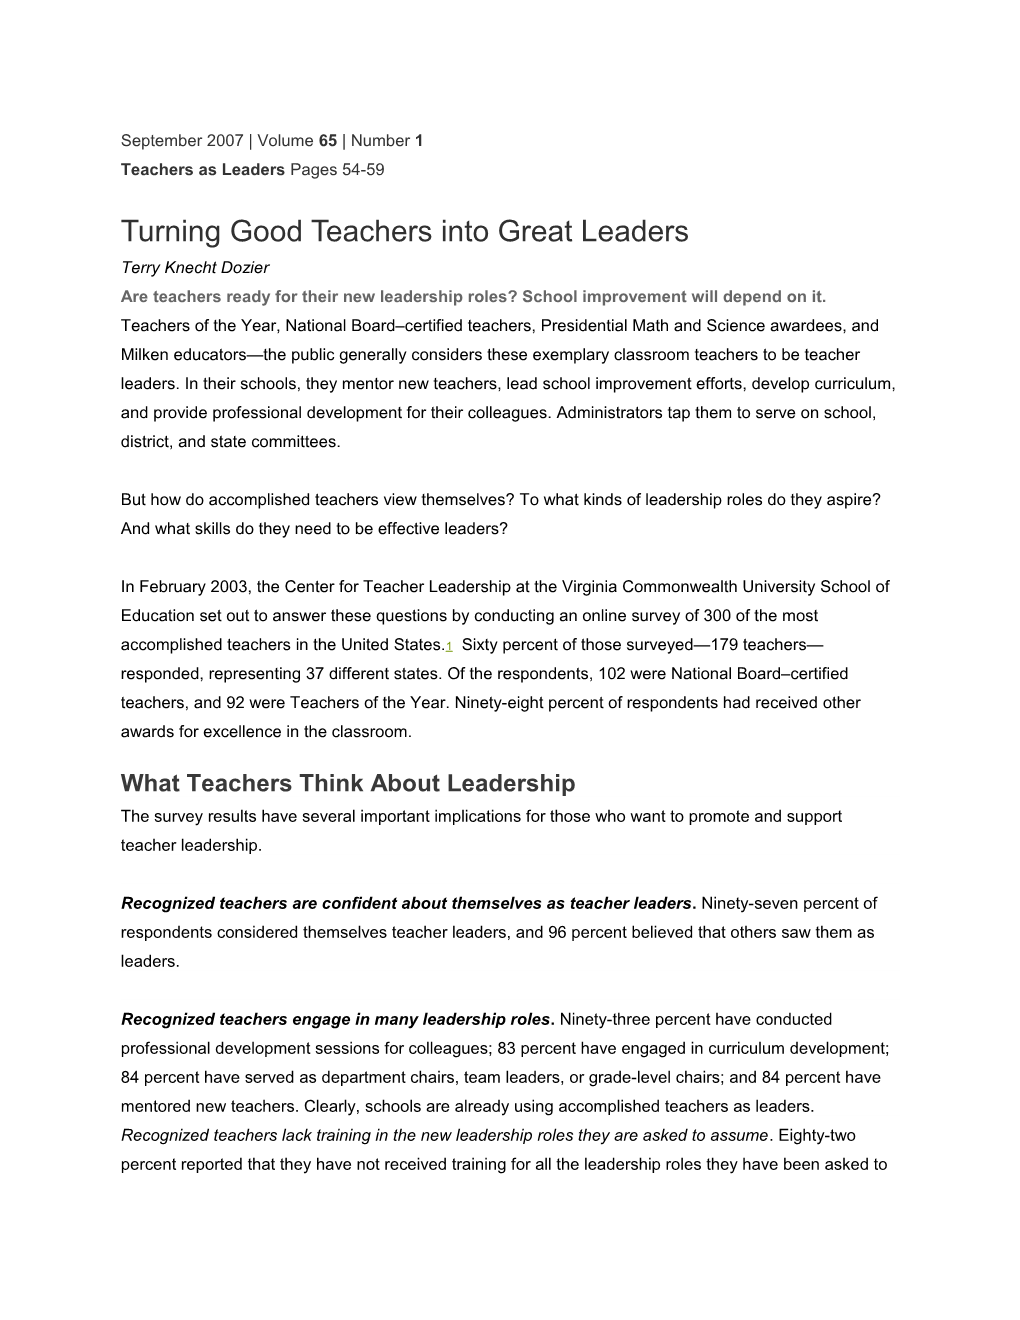 Turning Good Teachers Into Great Leaders